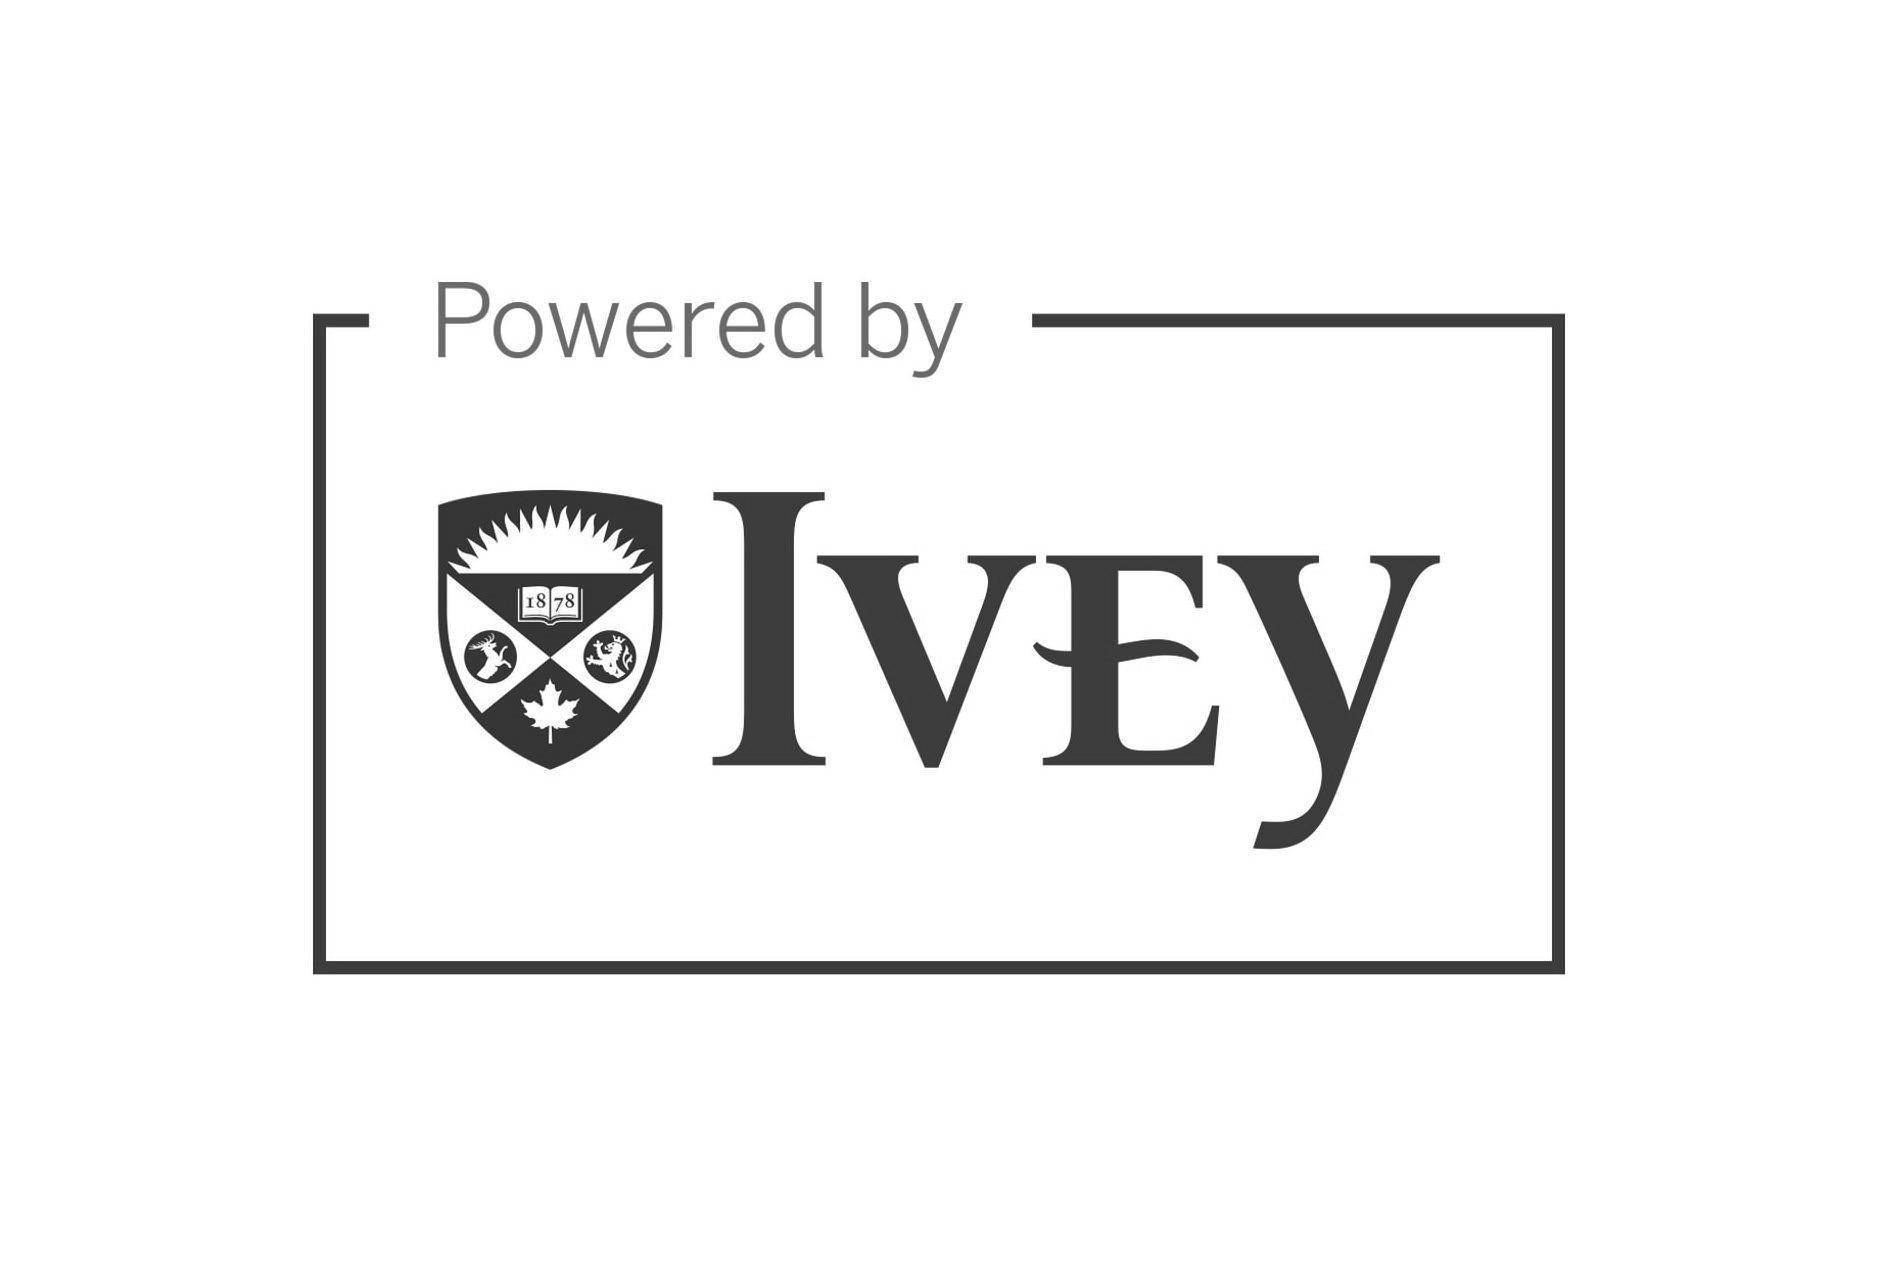  POWERED BY IVEY